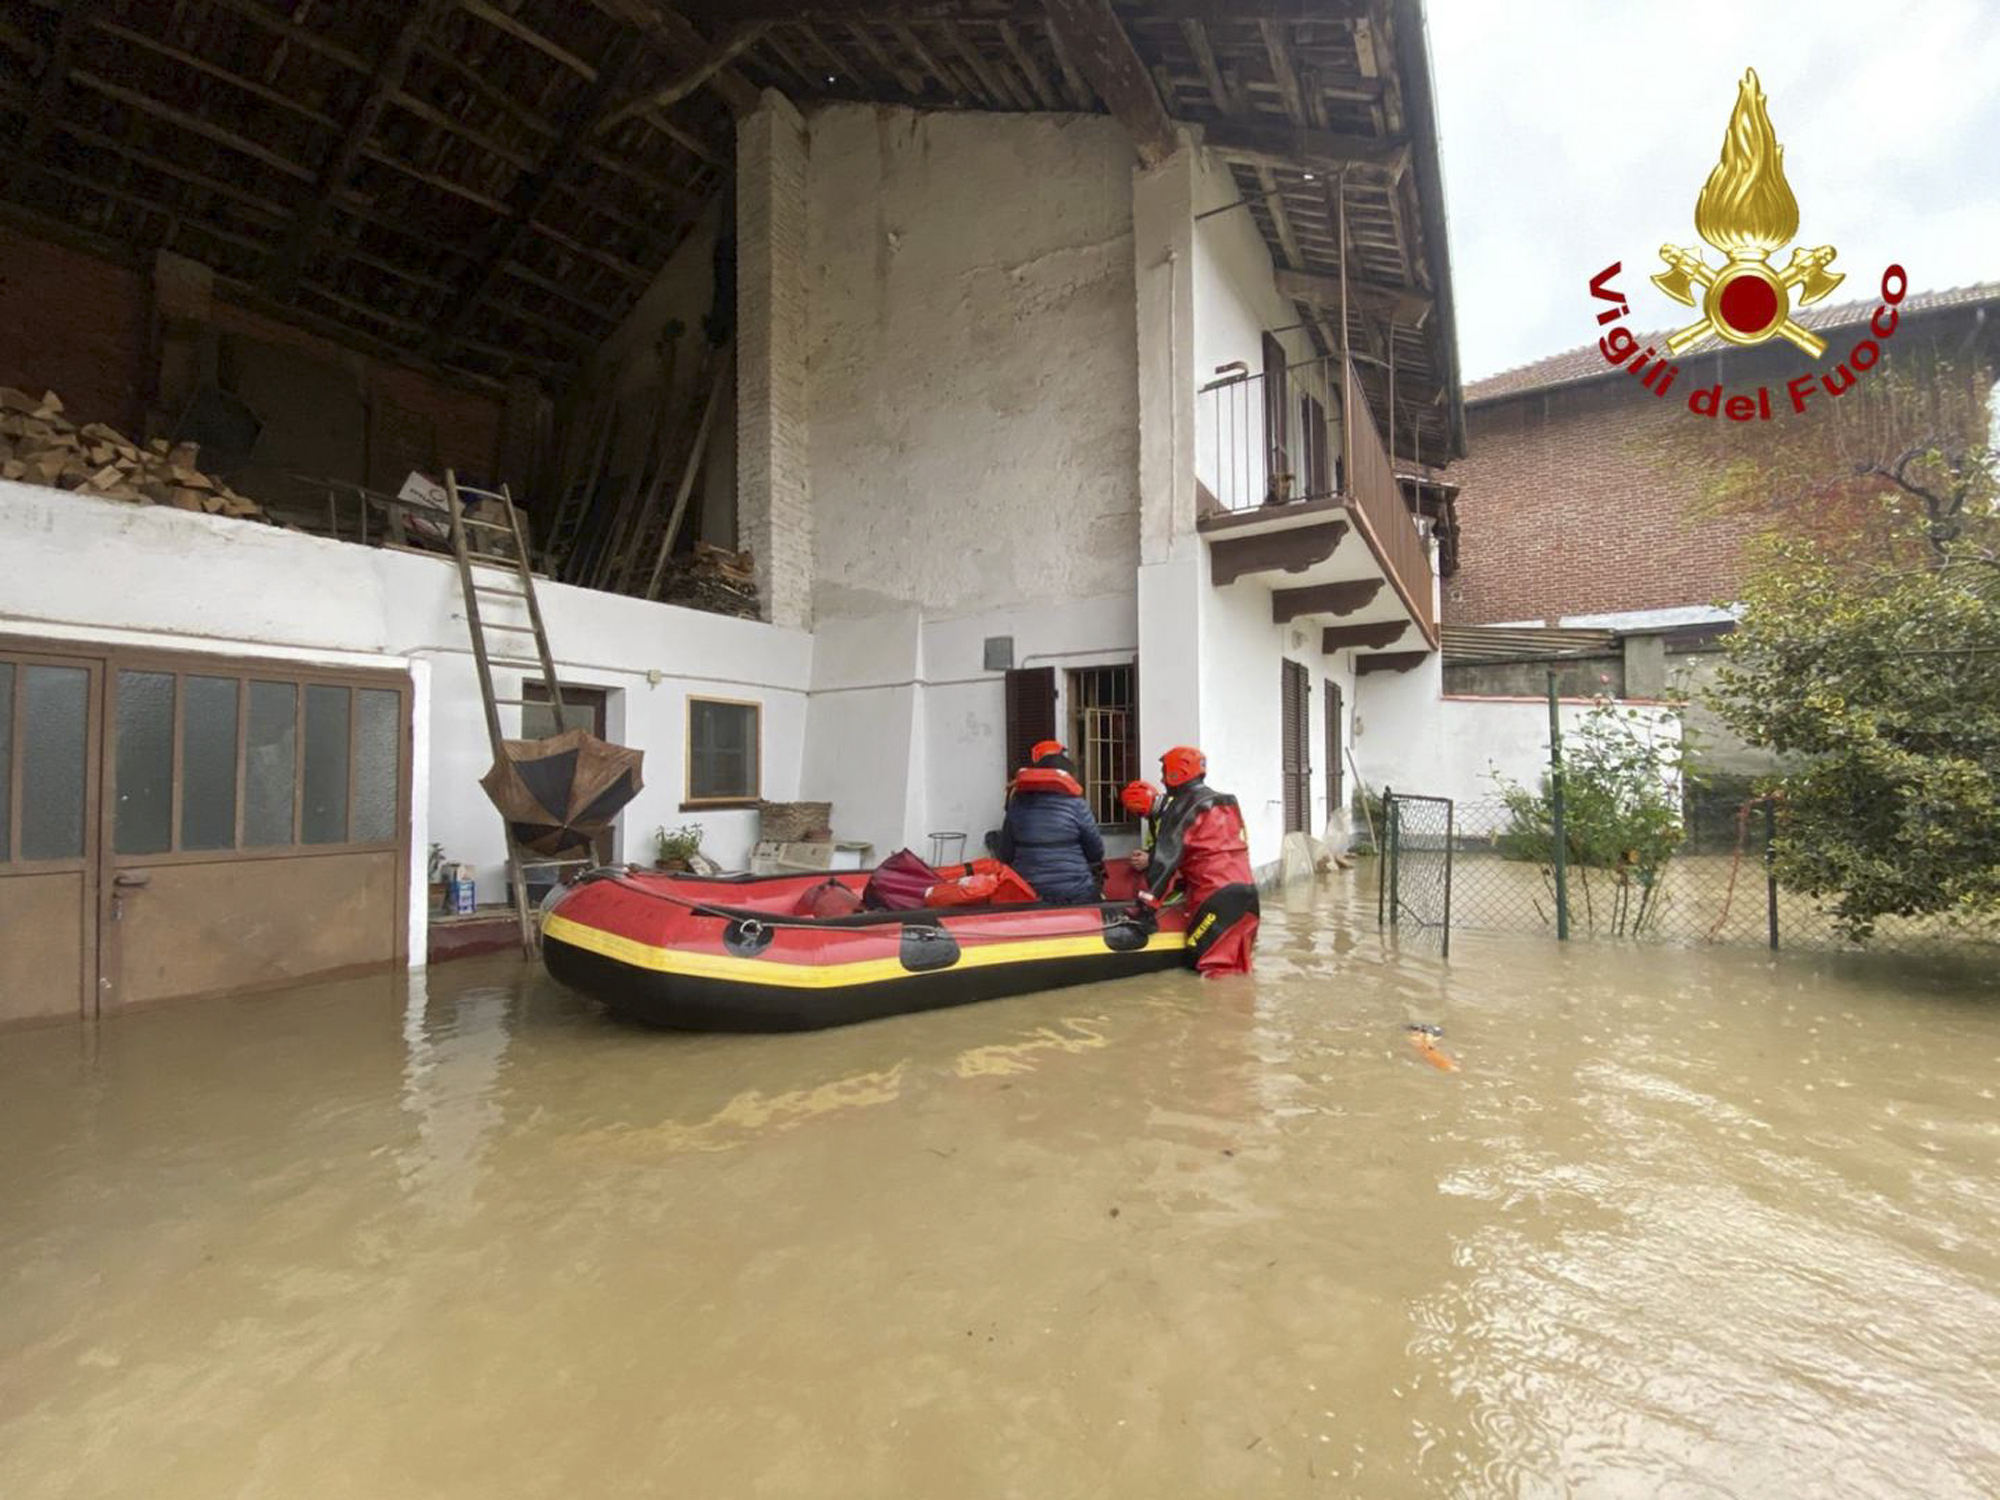 Firefighters evacuate people from house in Carde, near Cuneo, in the Piedmont region of northern Italy 